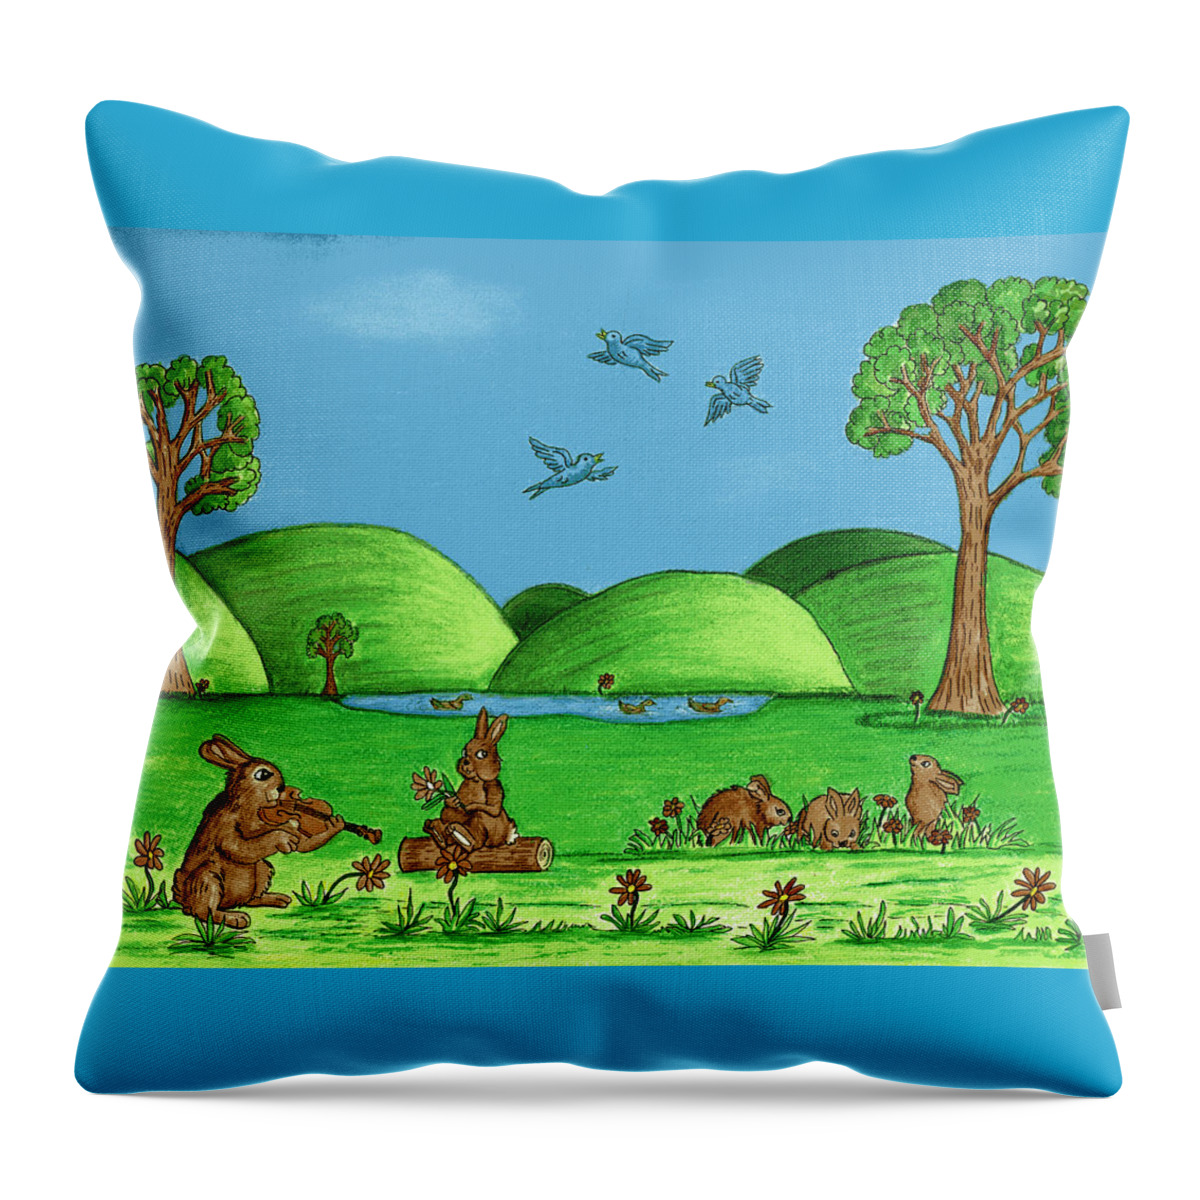 Landscape Throw Pillow featuring the drawing Country Bunnies by Christina Wedberg